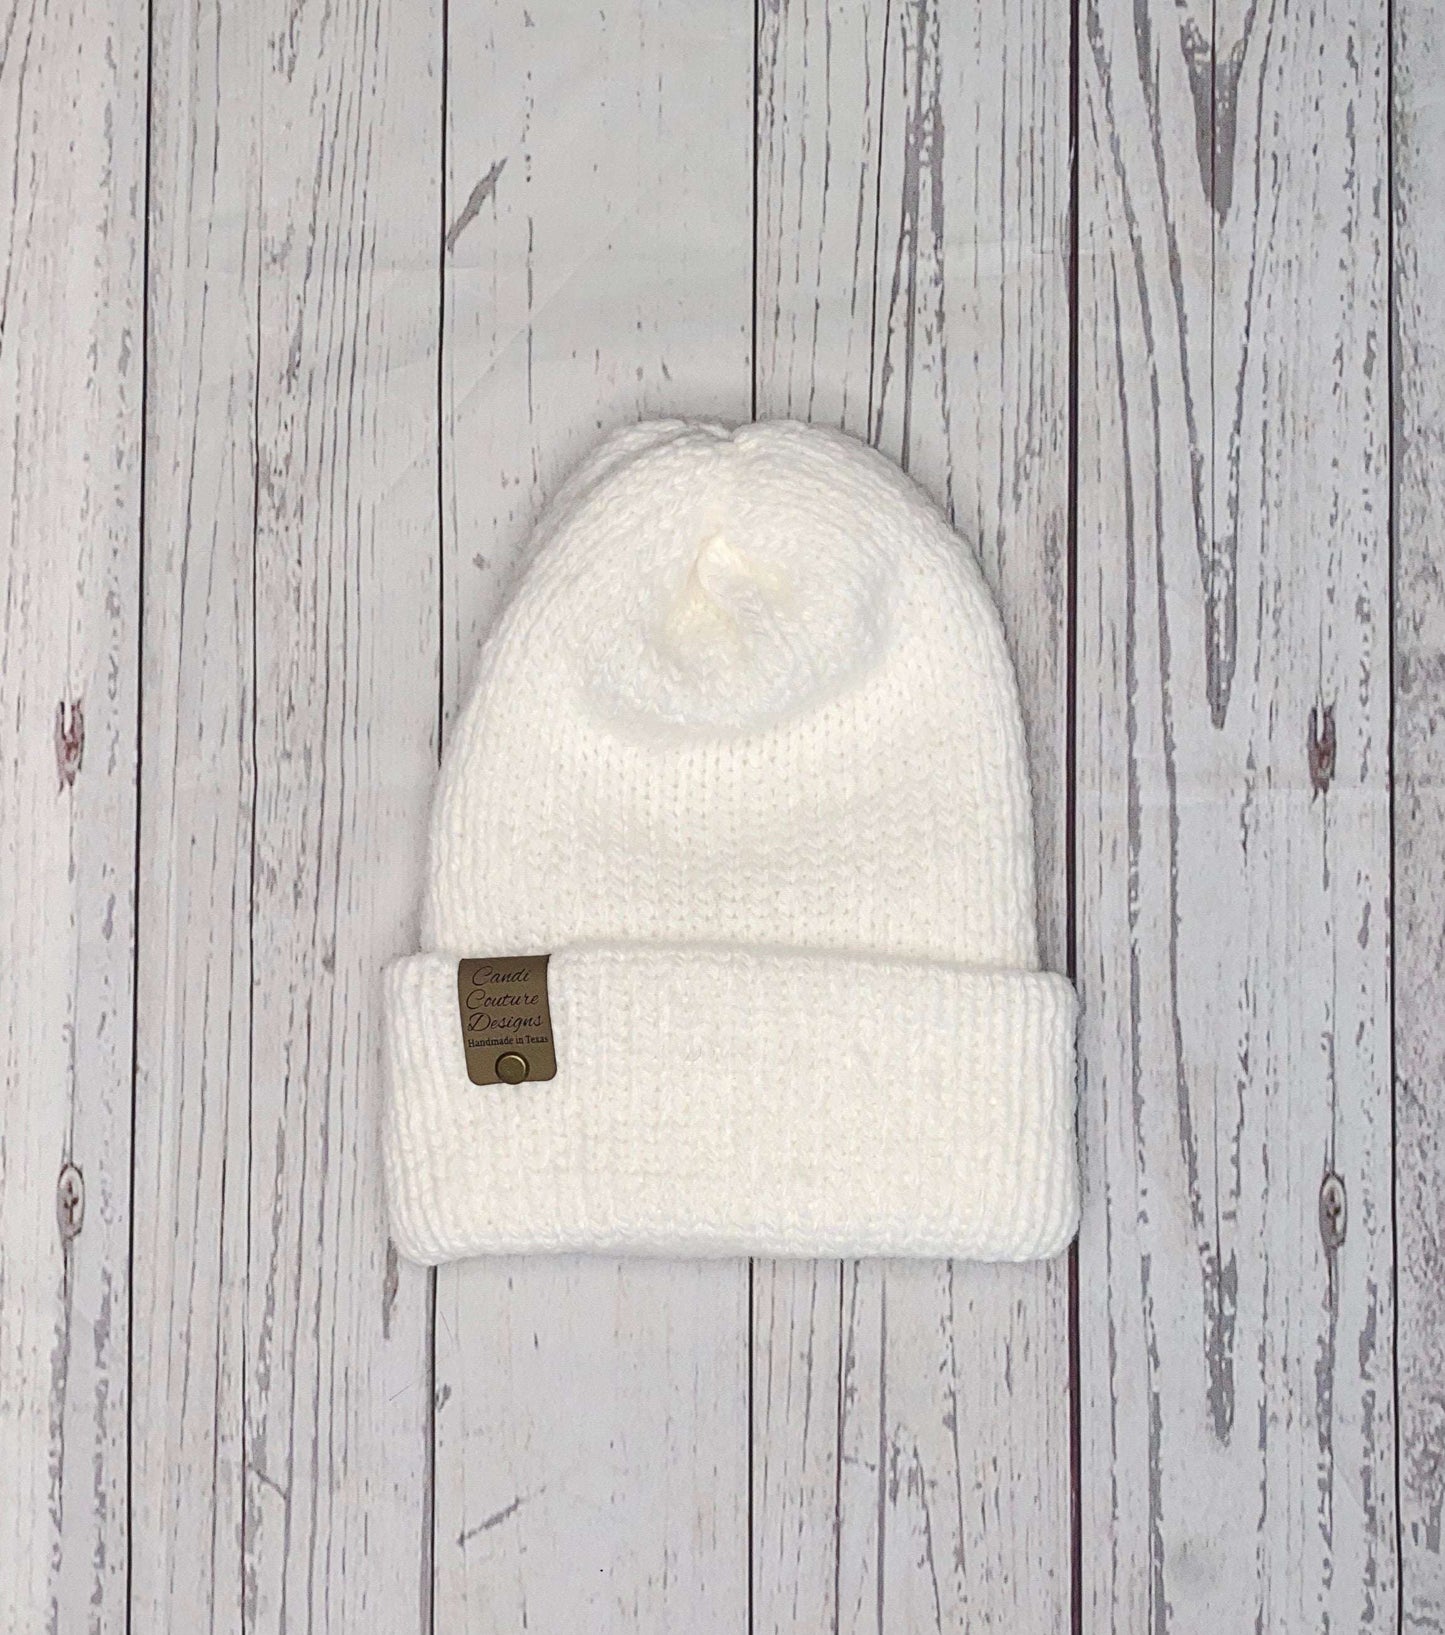 Alpaca Knit Beanie, Personalization Available